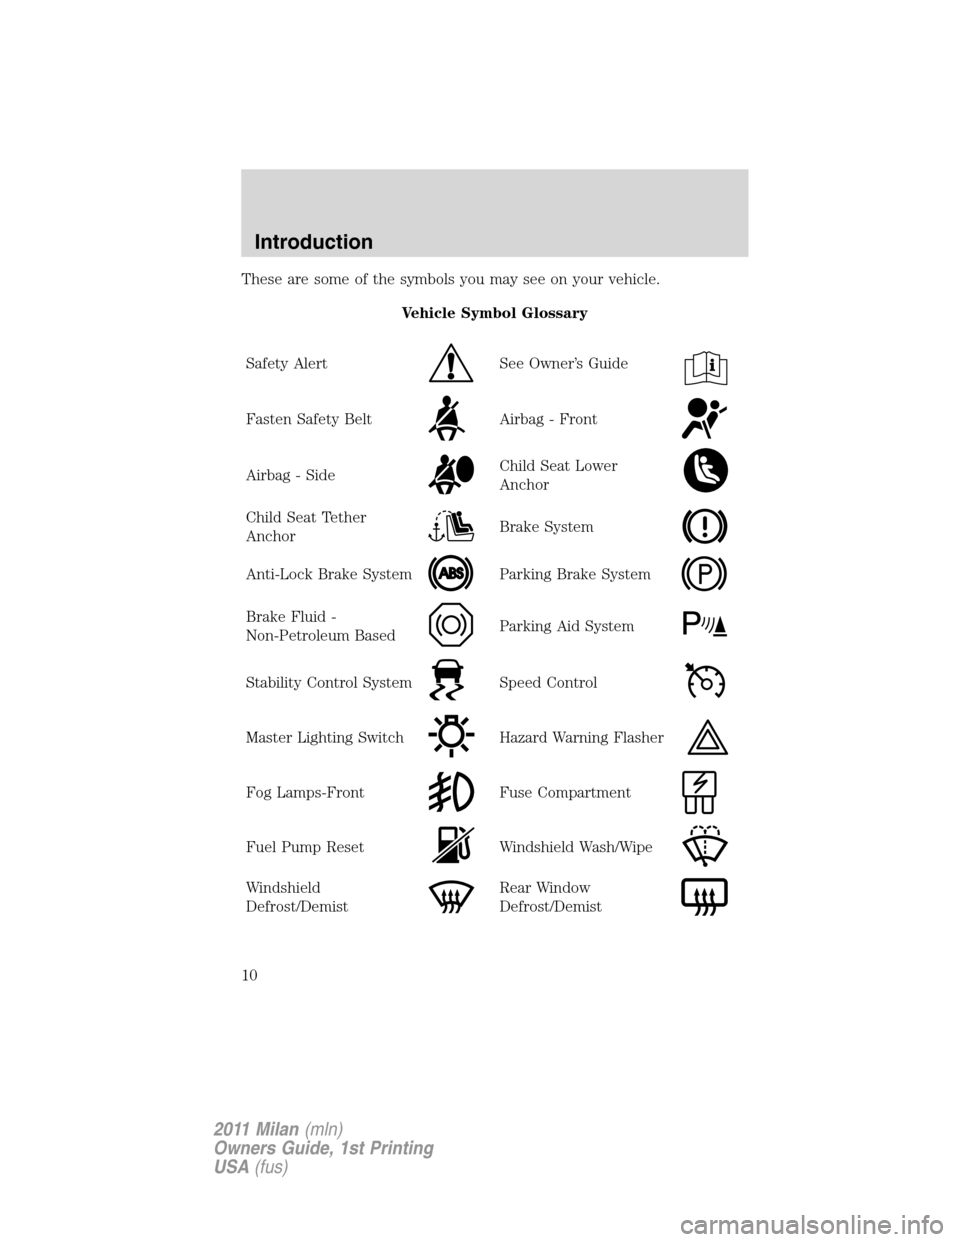 Mercury Milan 2011  Owners Manuals These are some of the symbols you may see on your vehicle.
Vehicle Symbol Glossary
Safety Alert
See Owner’s Guide
Fasten Safety BeltAirbag - Front
Airbag - SideChild Seat Lower
Anchor
Child Seat Tet